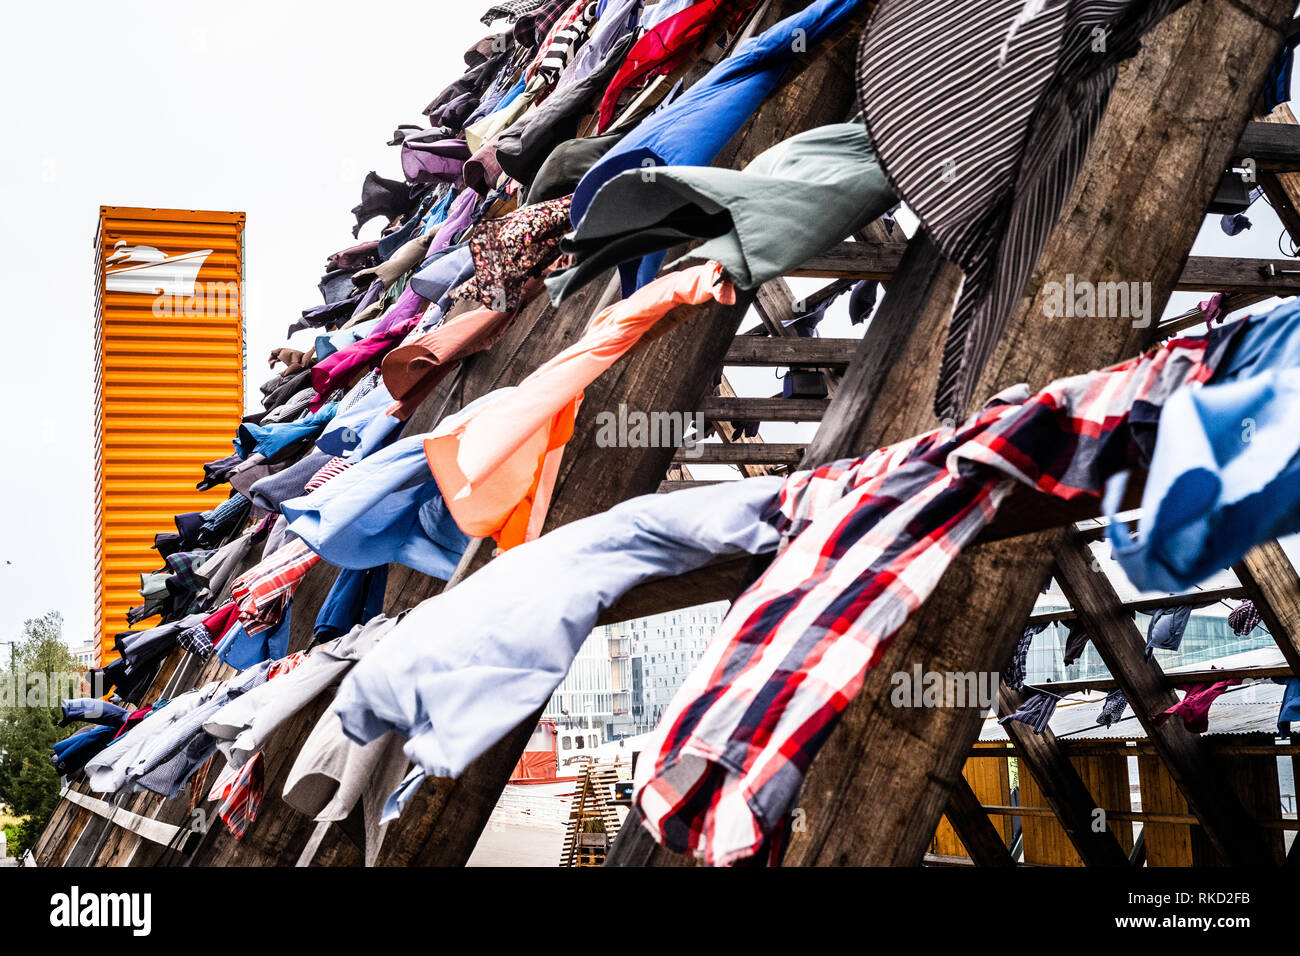 Special outdoor art project in Oslo called The Nomadic art project where 1000s of shirts hang outside on gigantic wooden poles at the Salt venue. Stock Photo